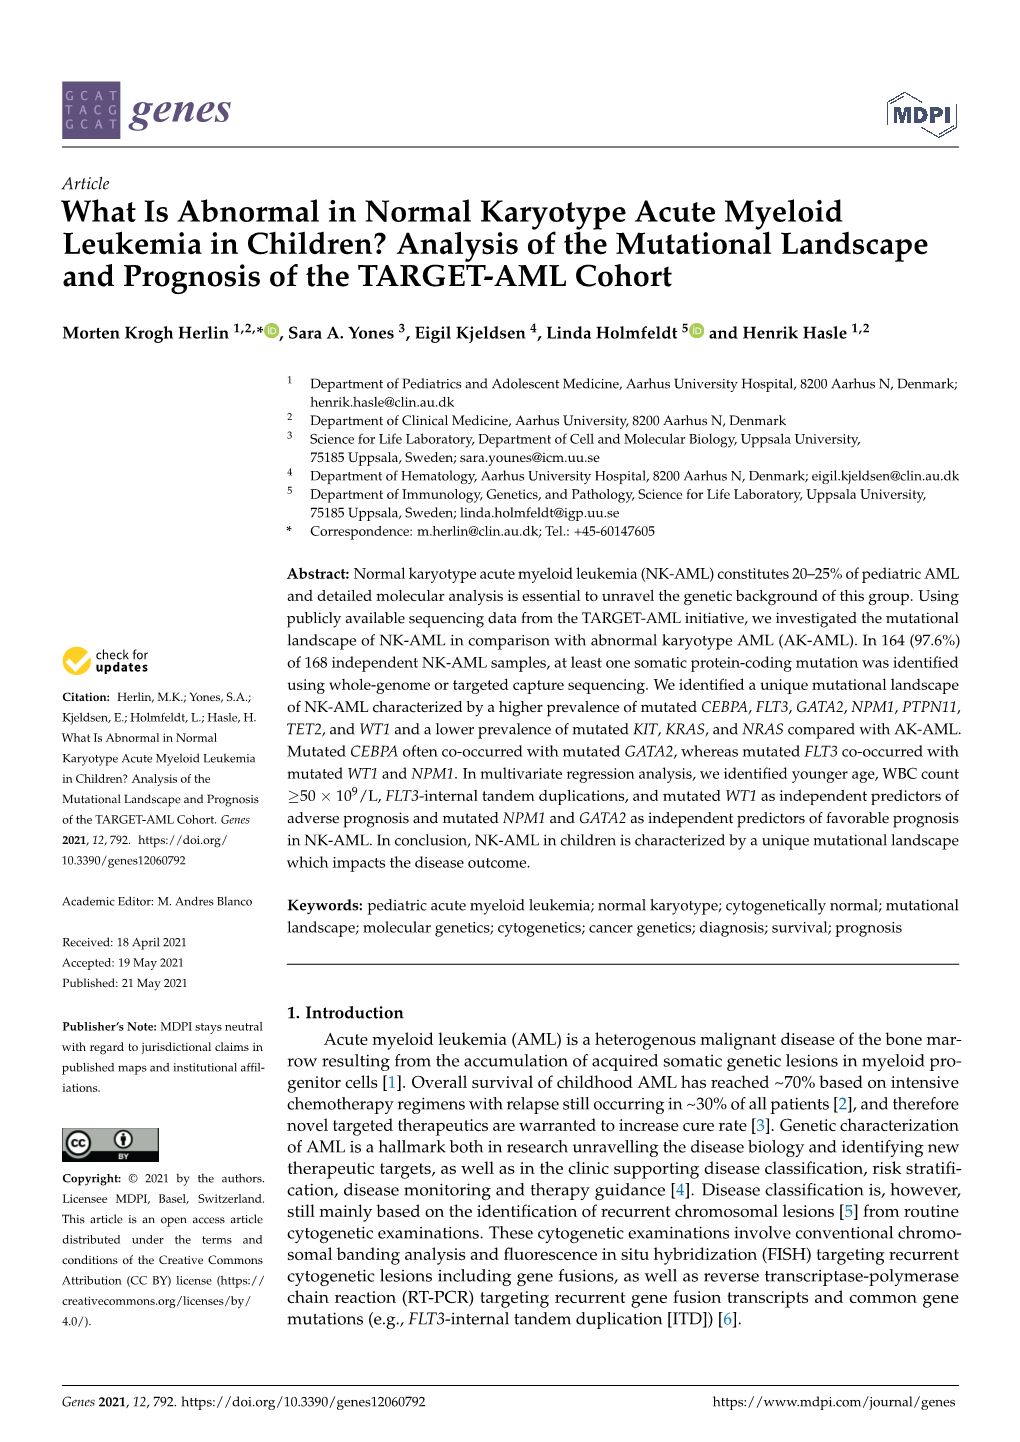 What Is Abnormal in Normal Karyotype Acute Myeloid Leukemia in Children? Analysis of the Mutational Landscape and Prognosis of the TARGET-AML Cohort